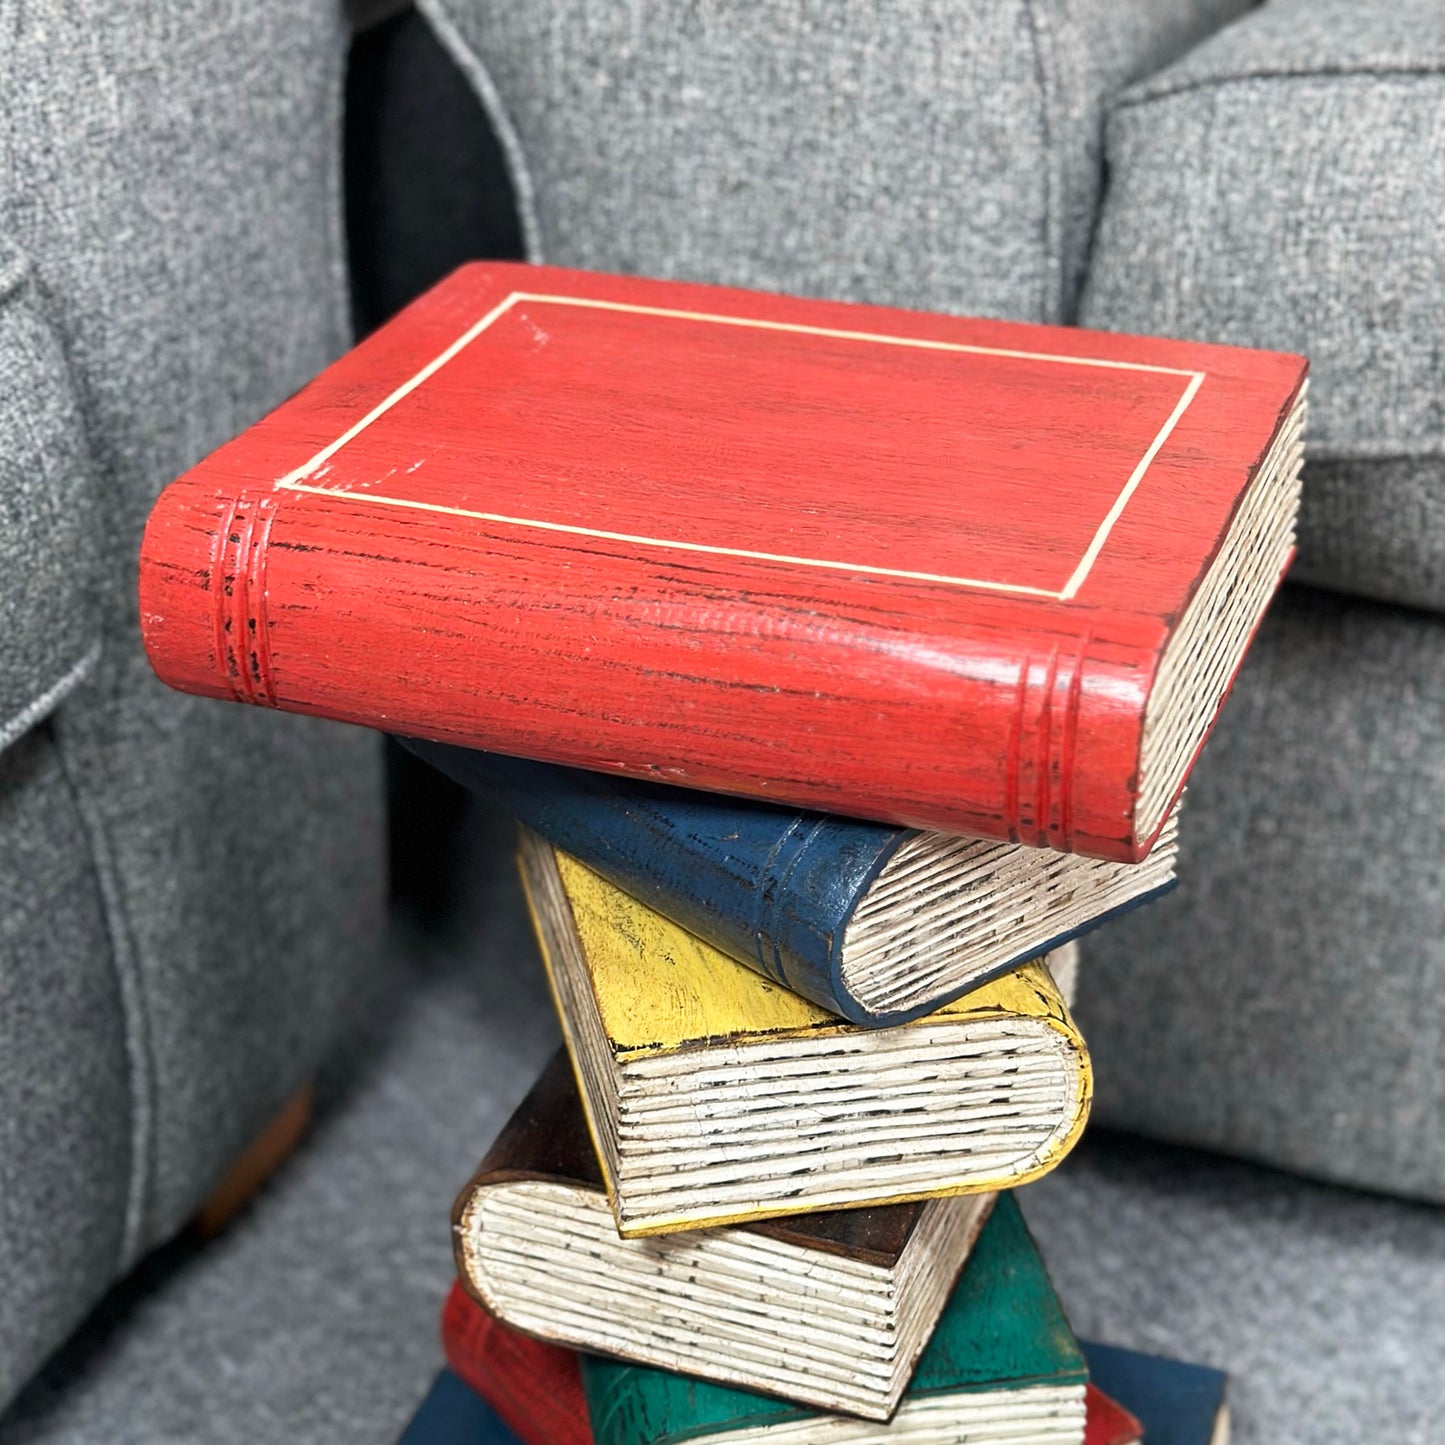 Solid Wood Colourful Book Stack Table